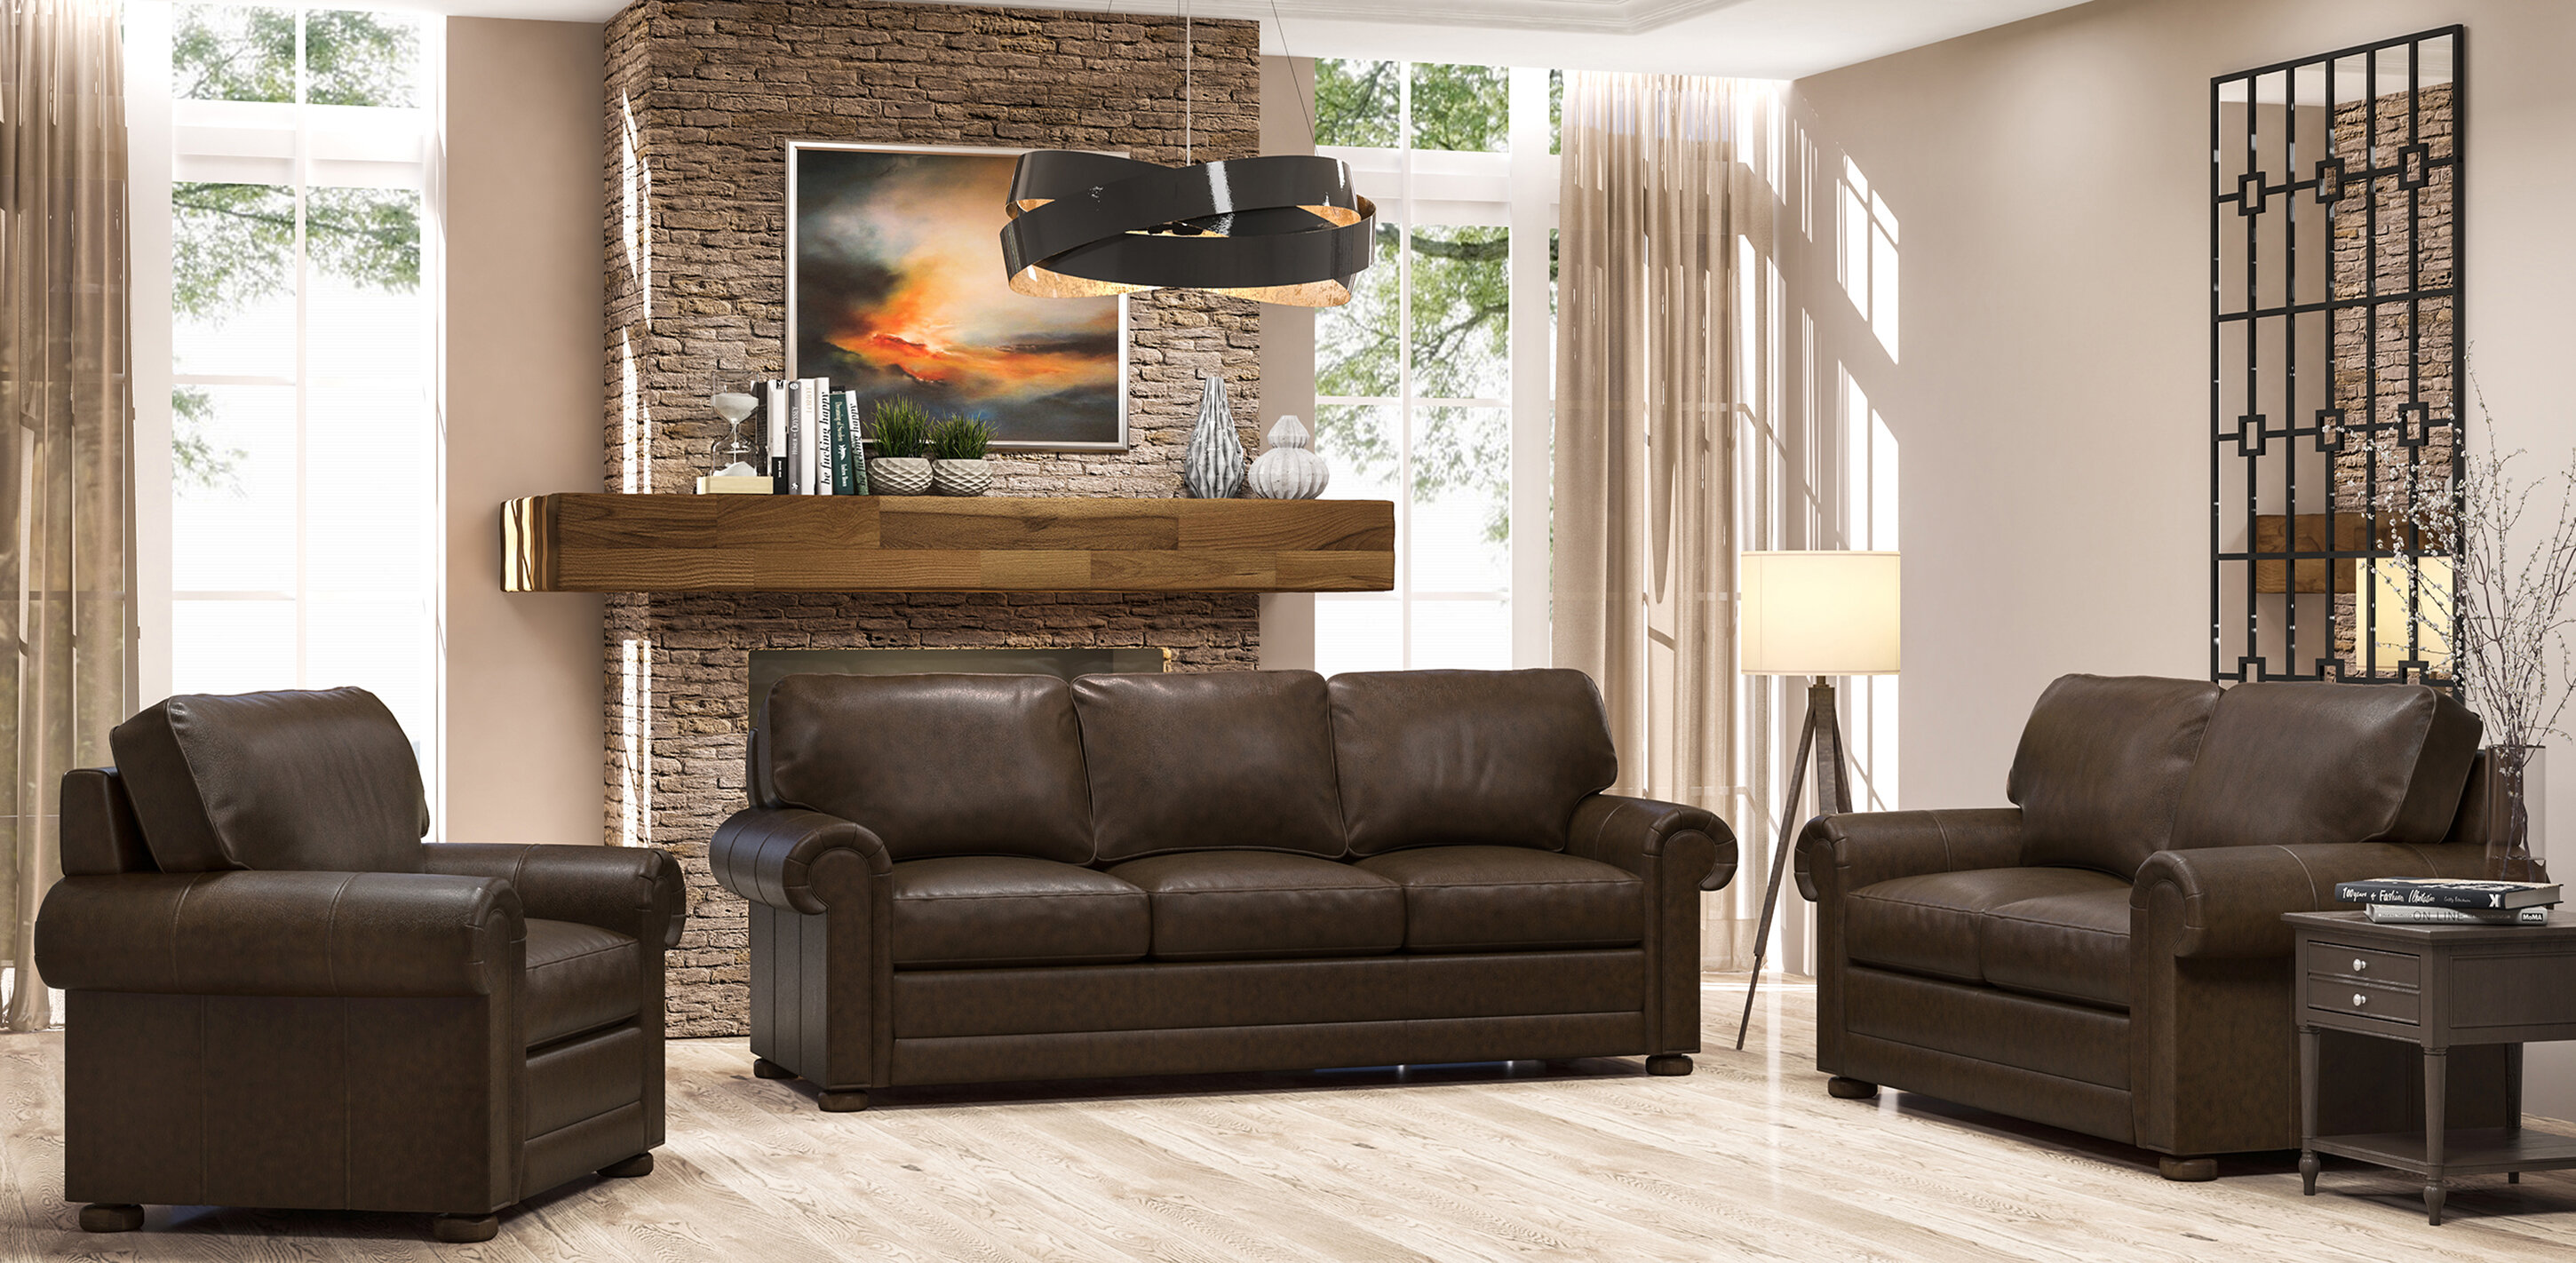 Ainehome 3 Piece Living Room Set Faux Leather with Sofa，Loveseat，Chair Brown & Black